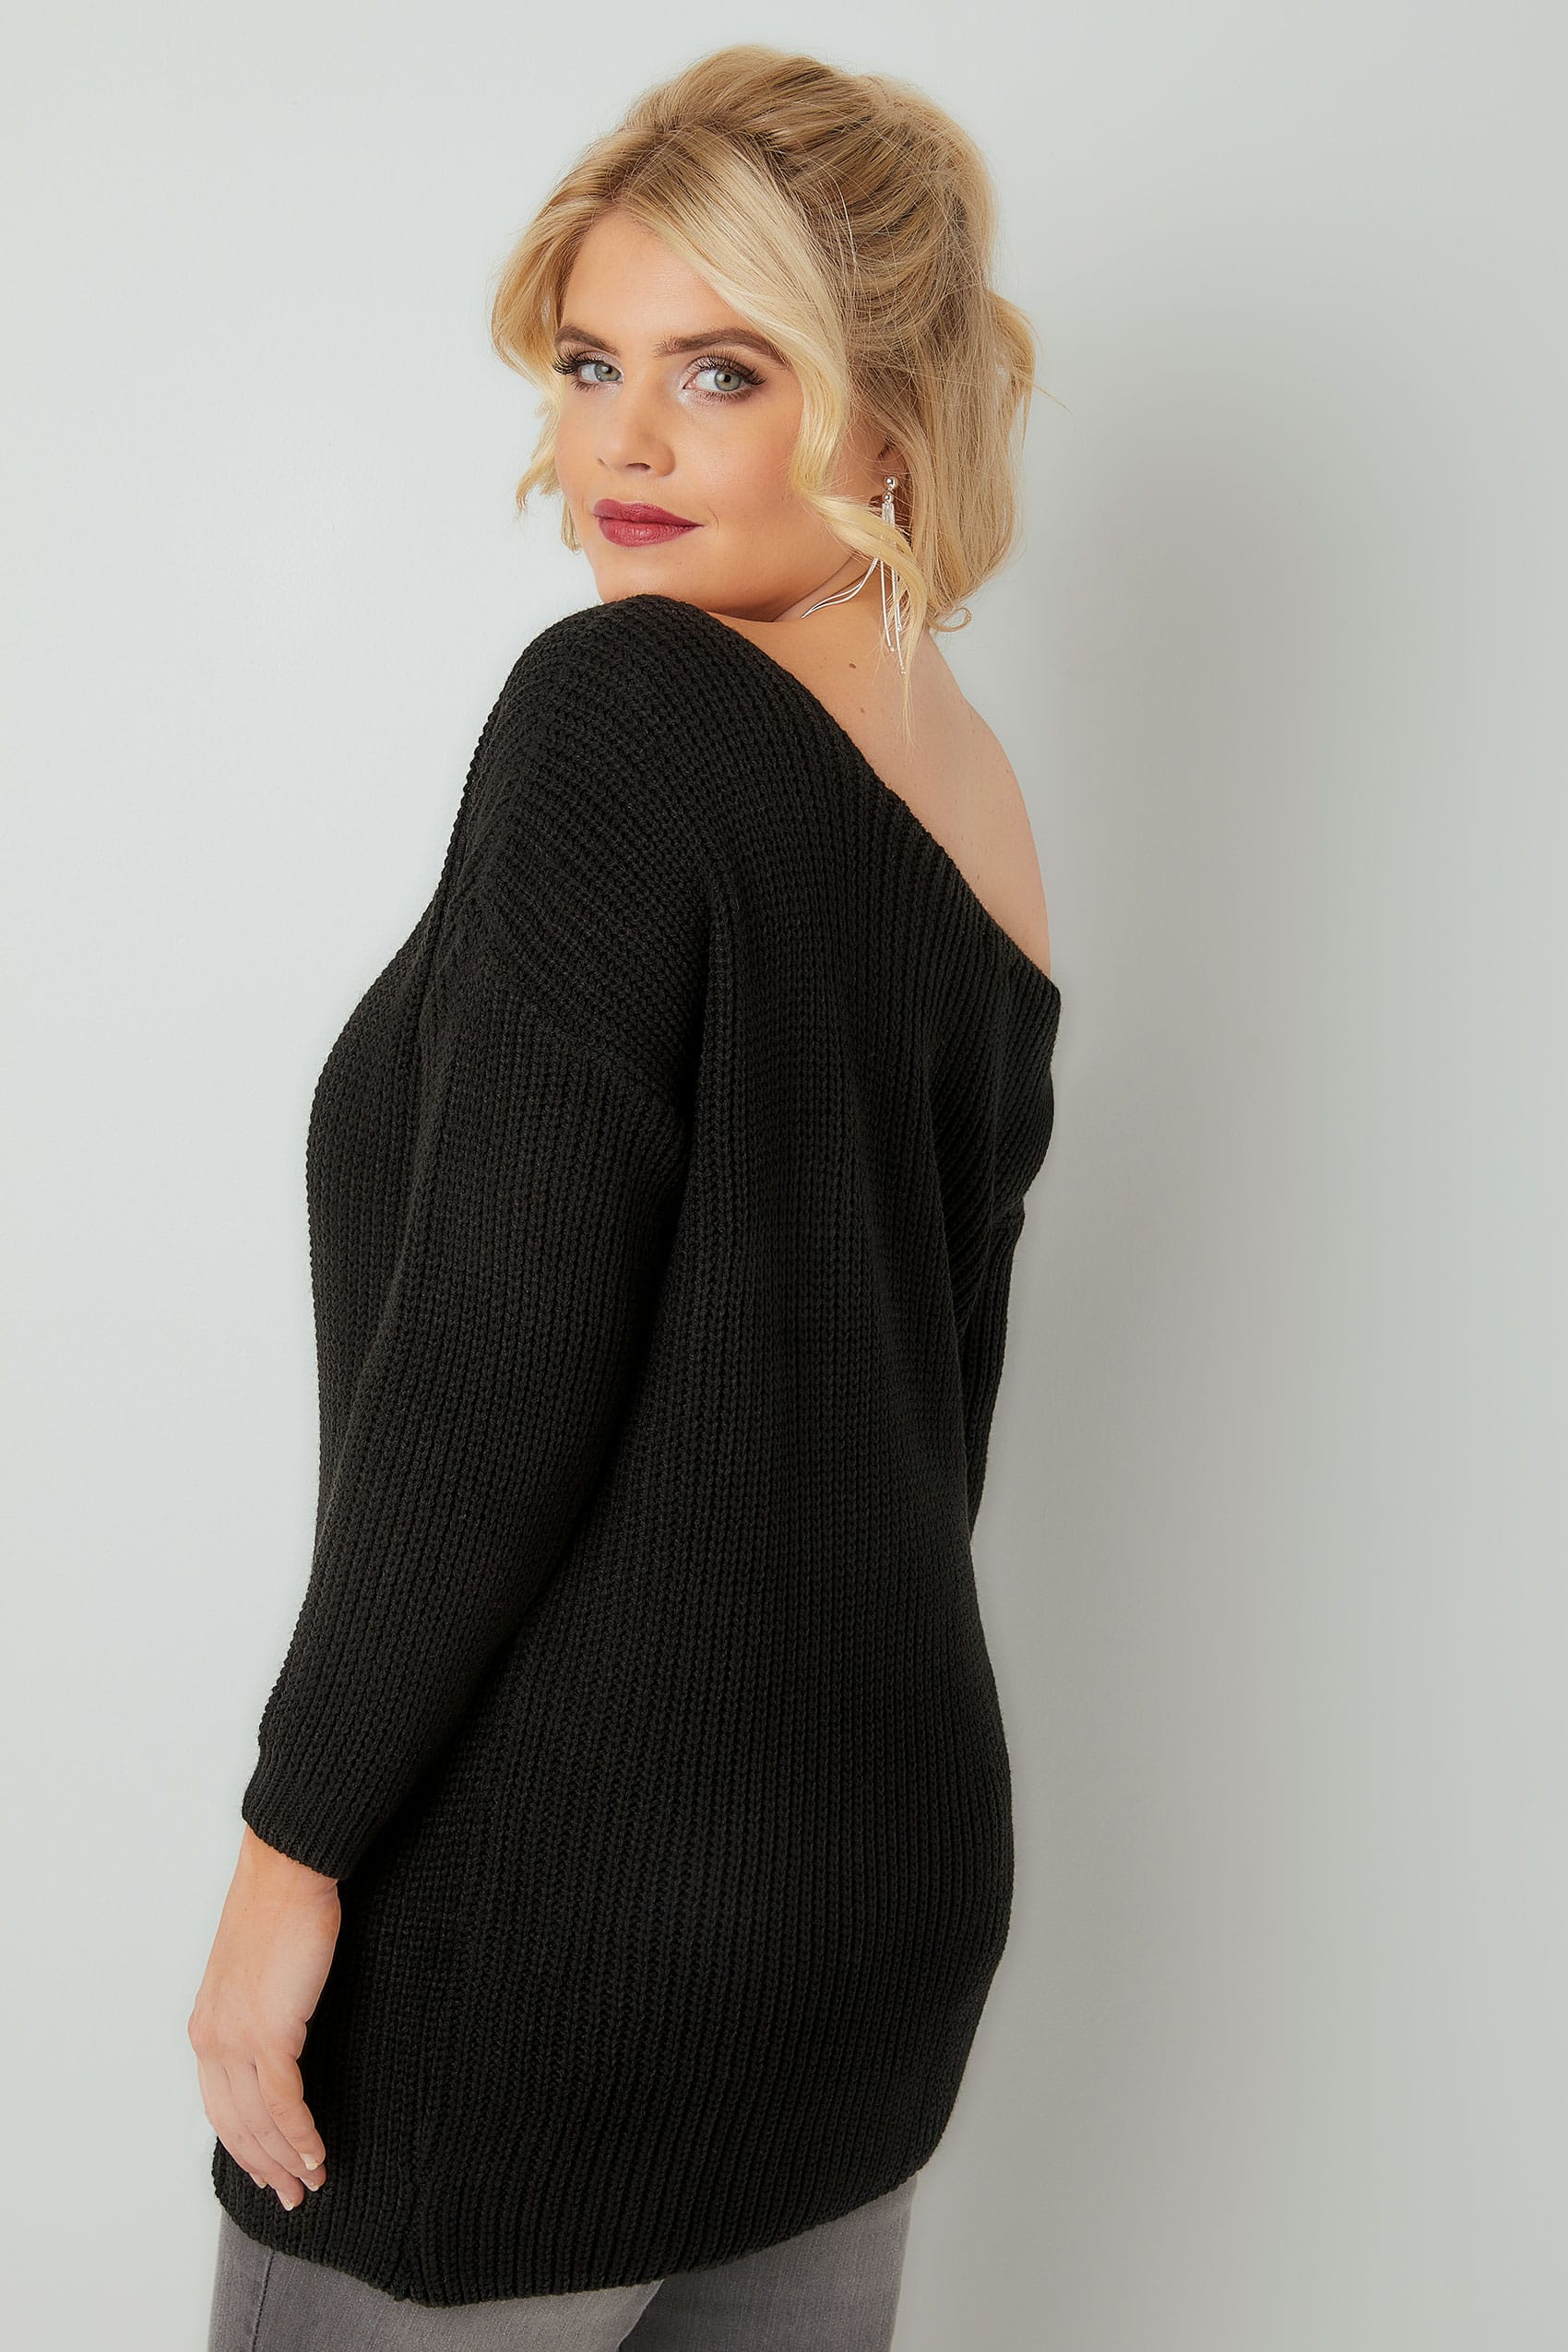 LIMITED COLLECTION Black Chunky Knit Asymmetric Jumper 